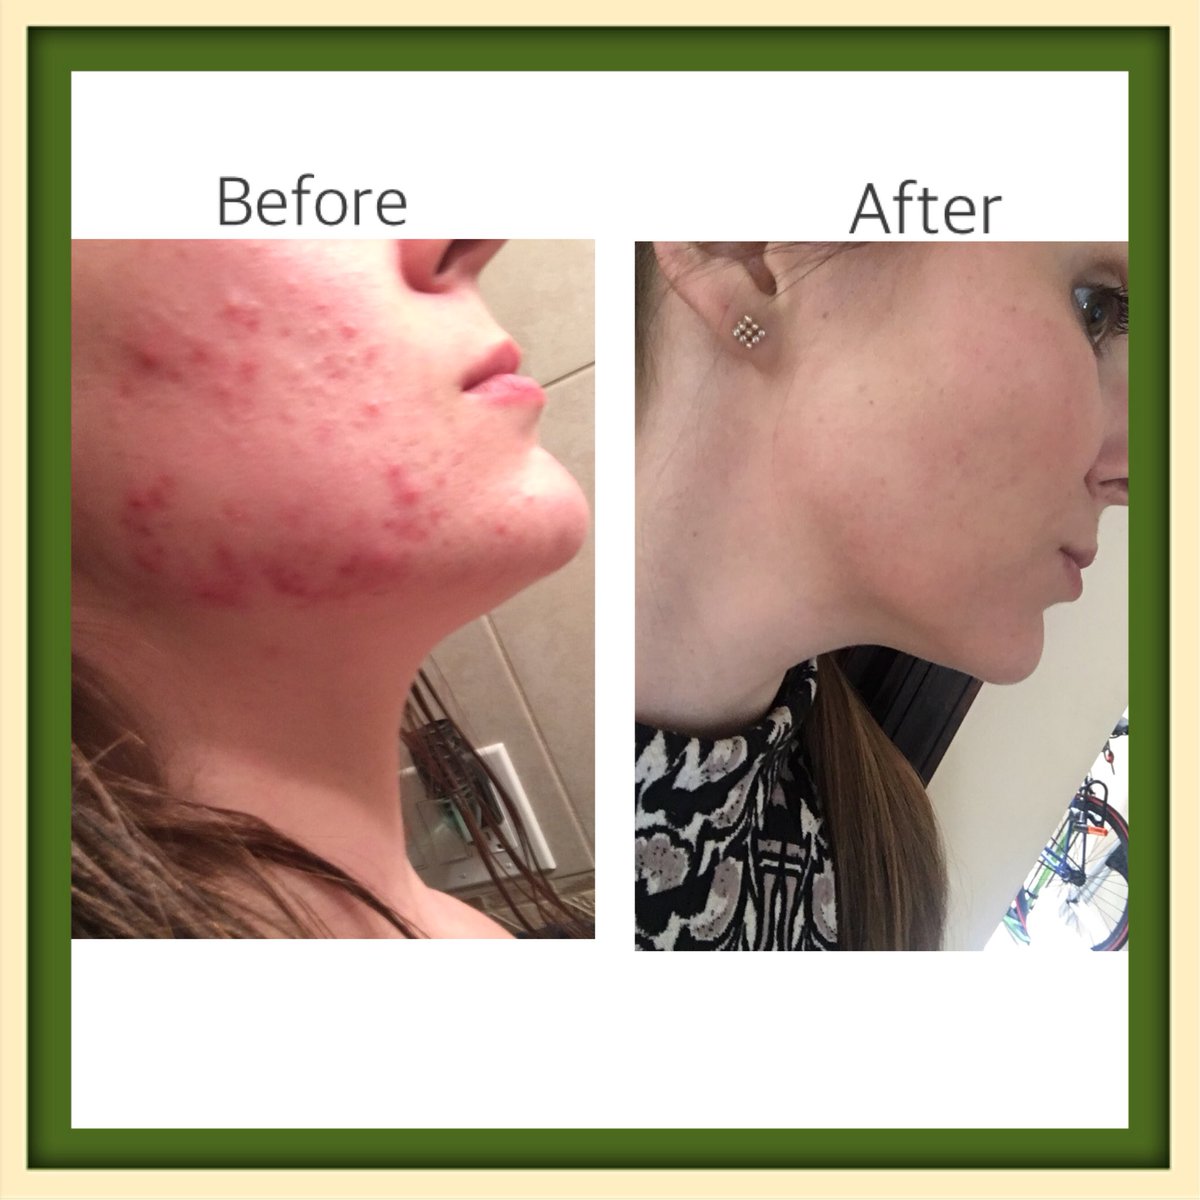 This was my skin 2 years ago... now look at it! thanks to @arbonne ‘s premium, pure, safe, and beneficial products! #transformation #pureproducts #veganskincare #acnetreatment #toxinfree #noanimaltesting #acne #nopreservatives #healthyskin #ibelieve #clearskin #safeskincare